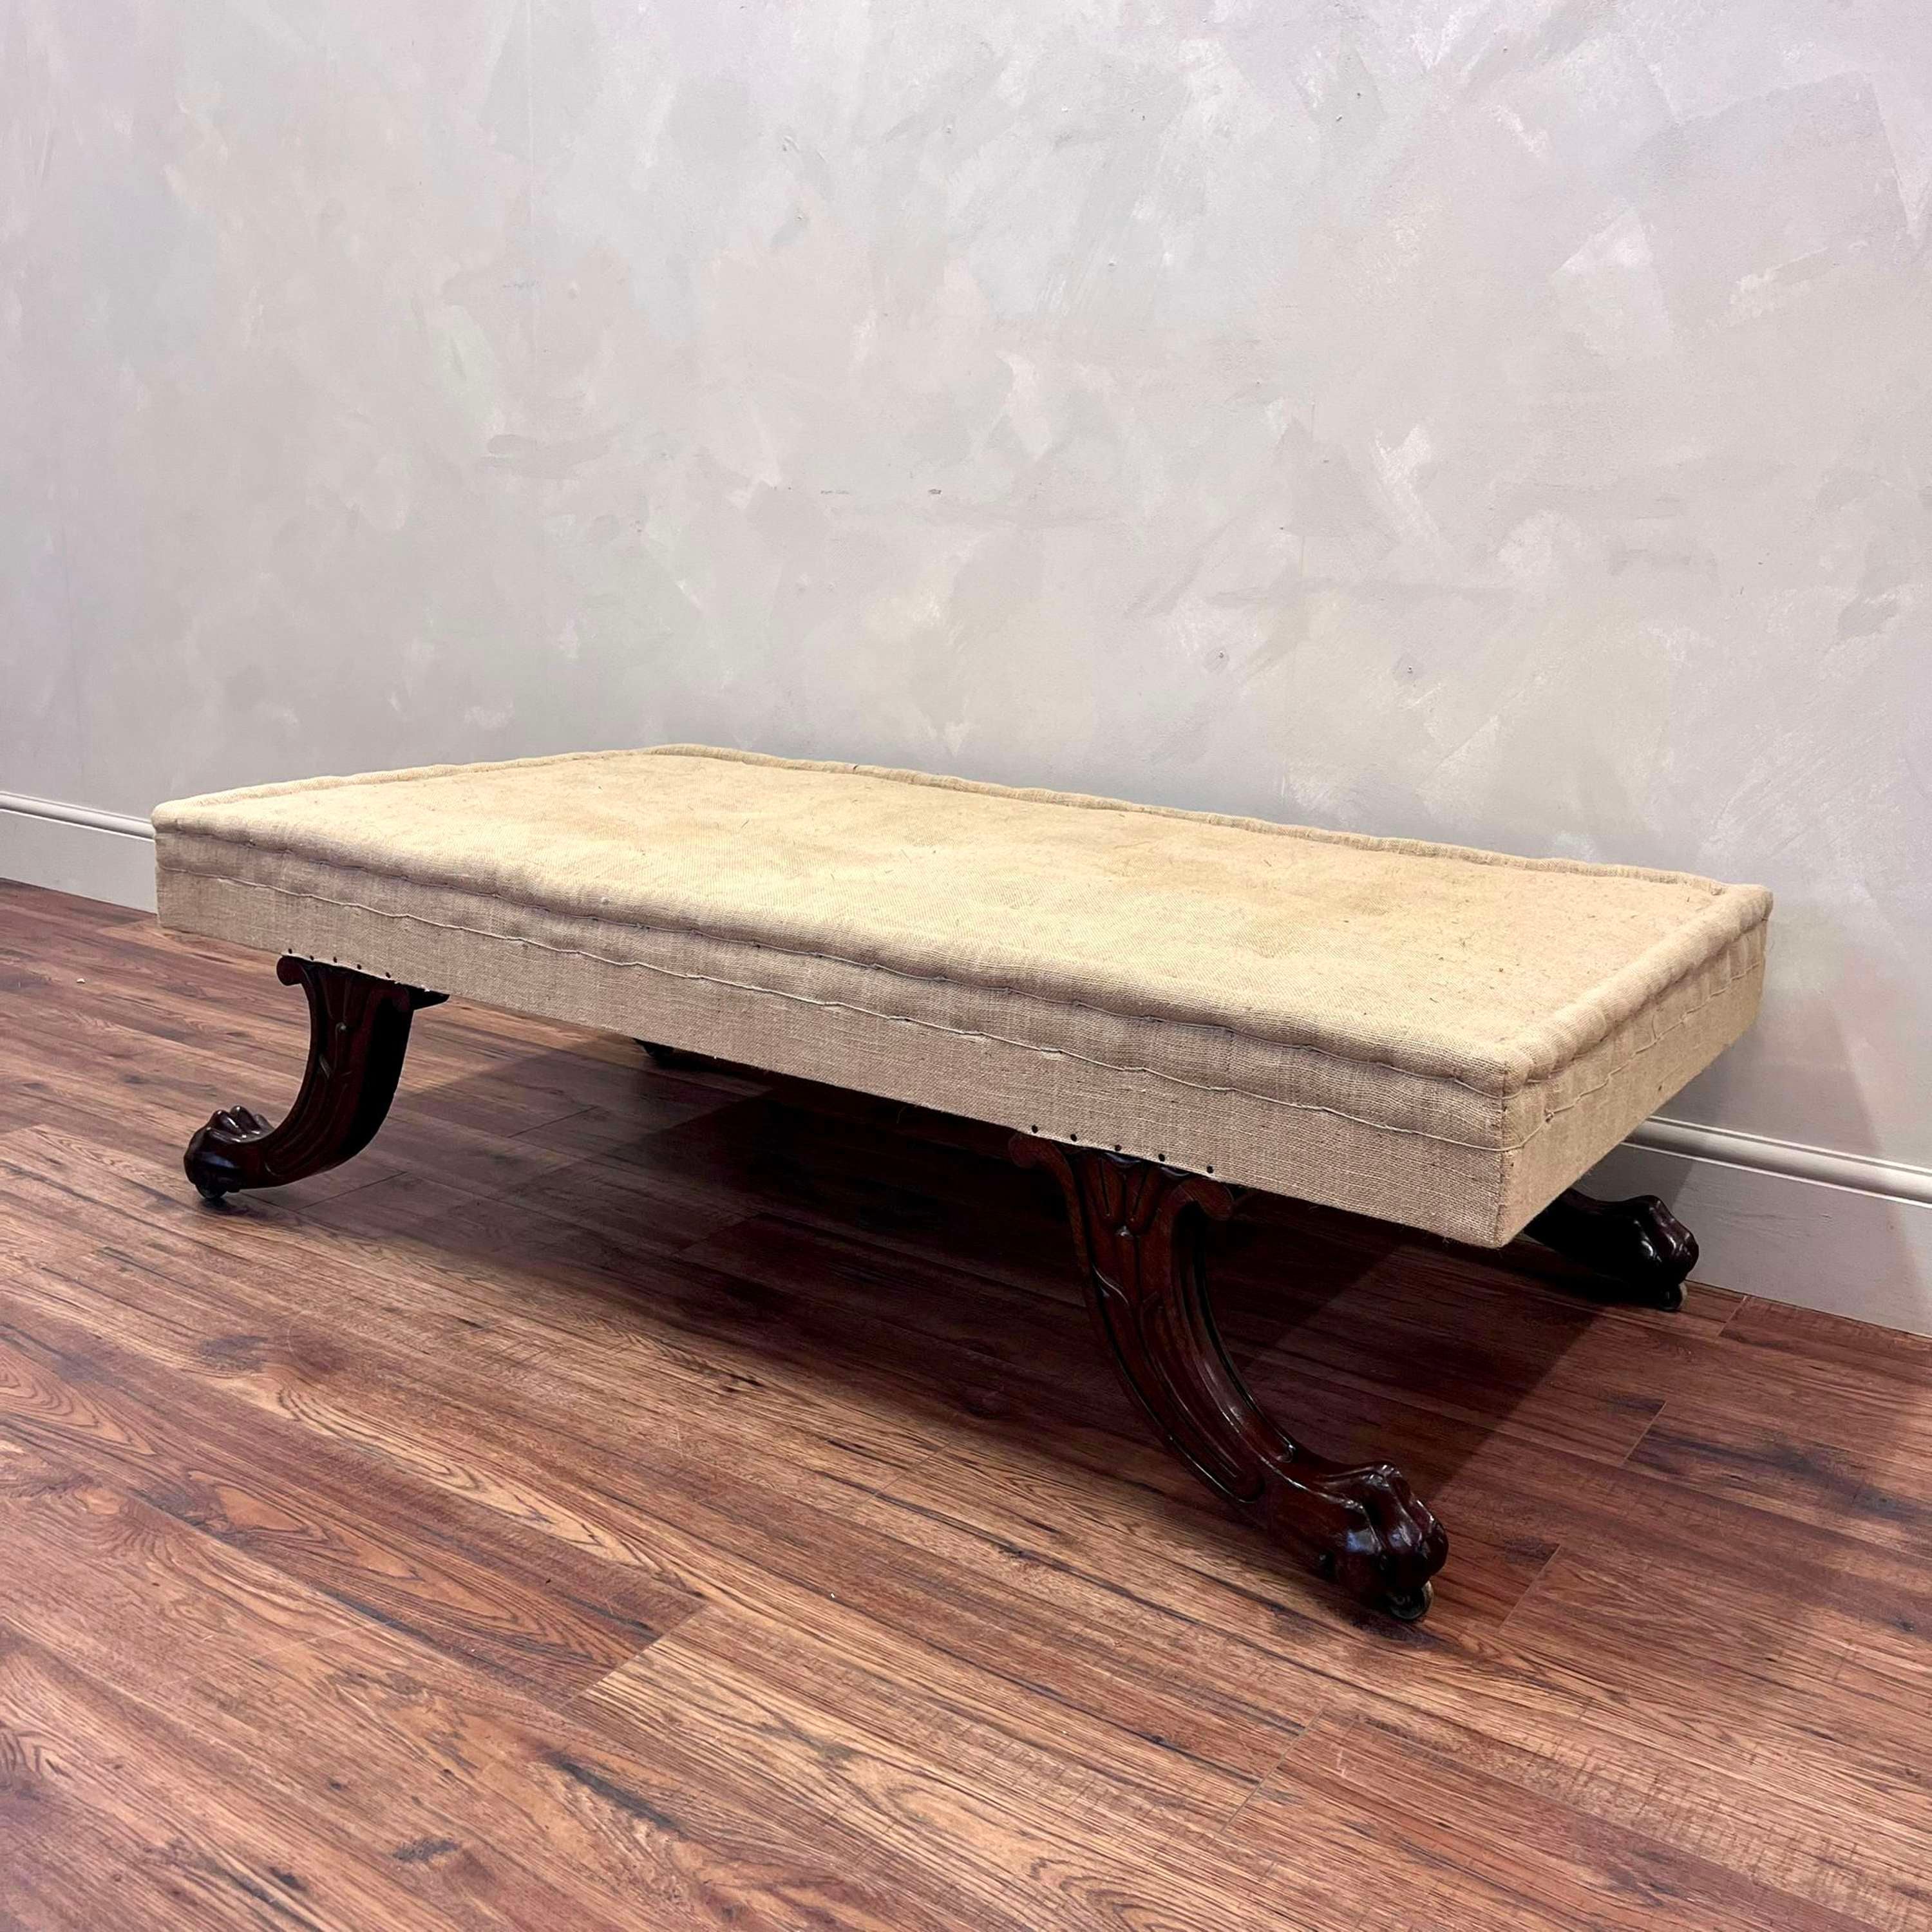 Super scale centre footstool.
The frame has been bespoke made by a joiner, using 19th century swept-away mahogany lion paw legs, on original brass castors.
The upholstery in hessian has been achieved using traditional methods, with the addition of